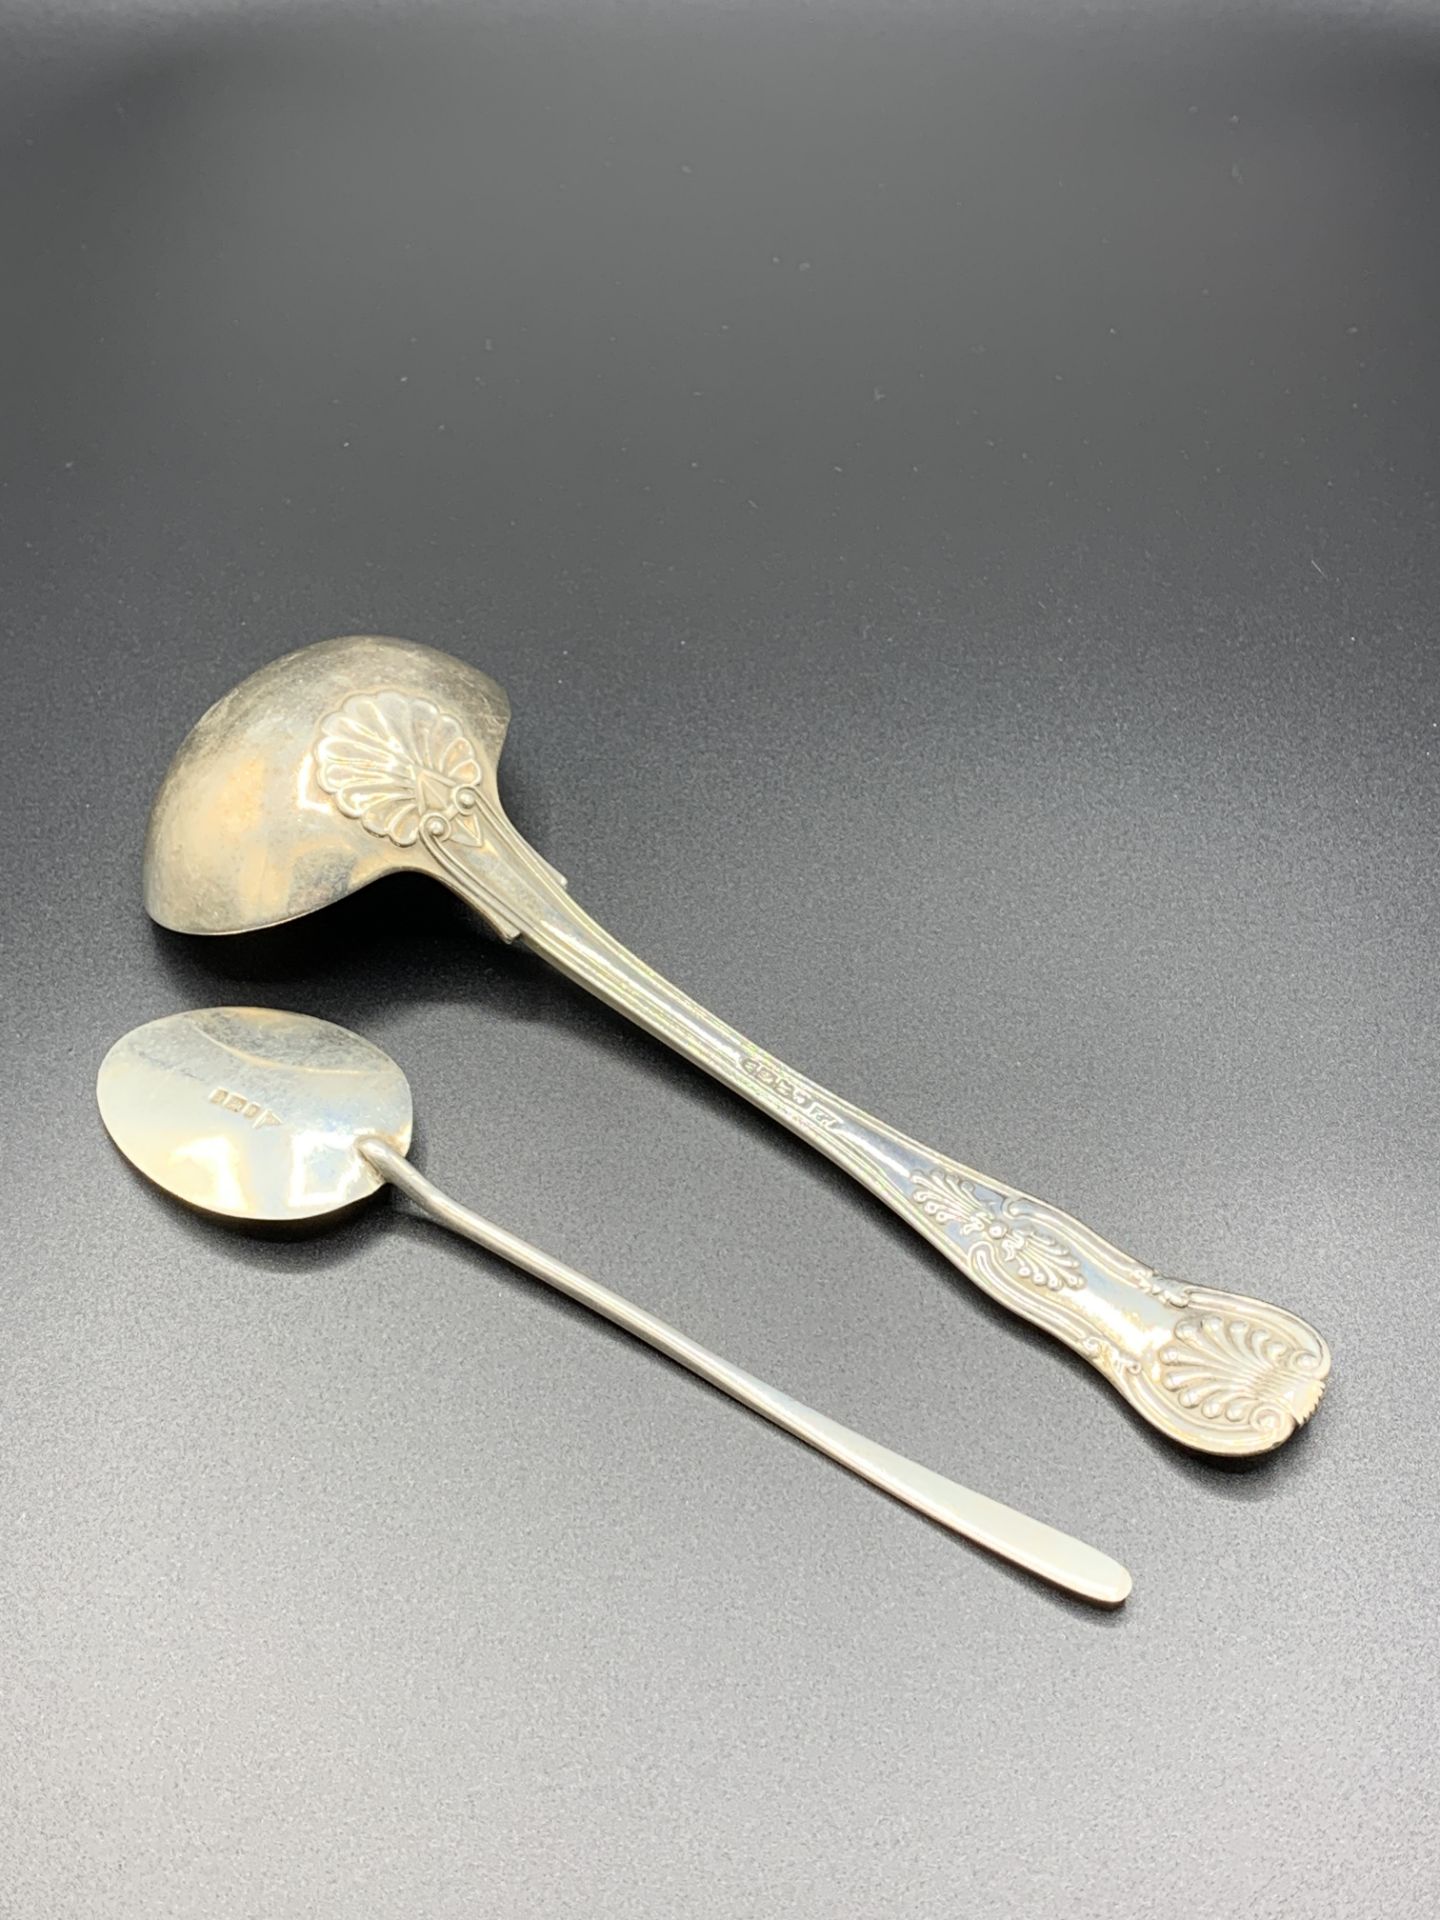 Irish silver ladle, Dublin 1842, together with a silver spoon by Walker & Hall - Image 2 of 2